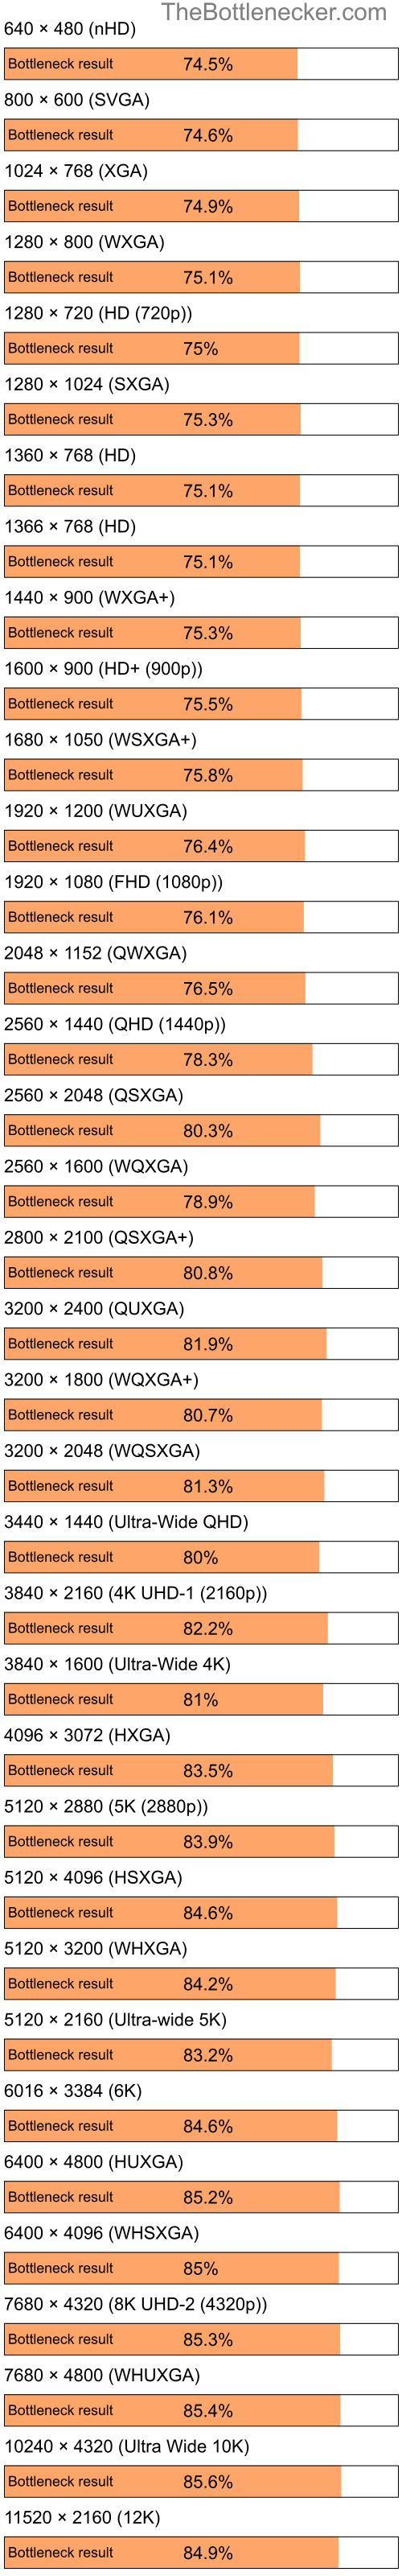 Bottleneck results by resolution for Intel Atom Z520 and AMD Radeon X1250 in General Tasks